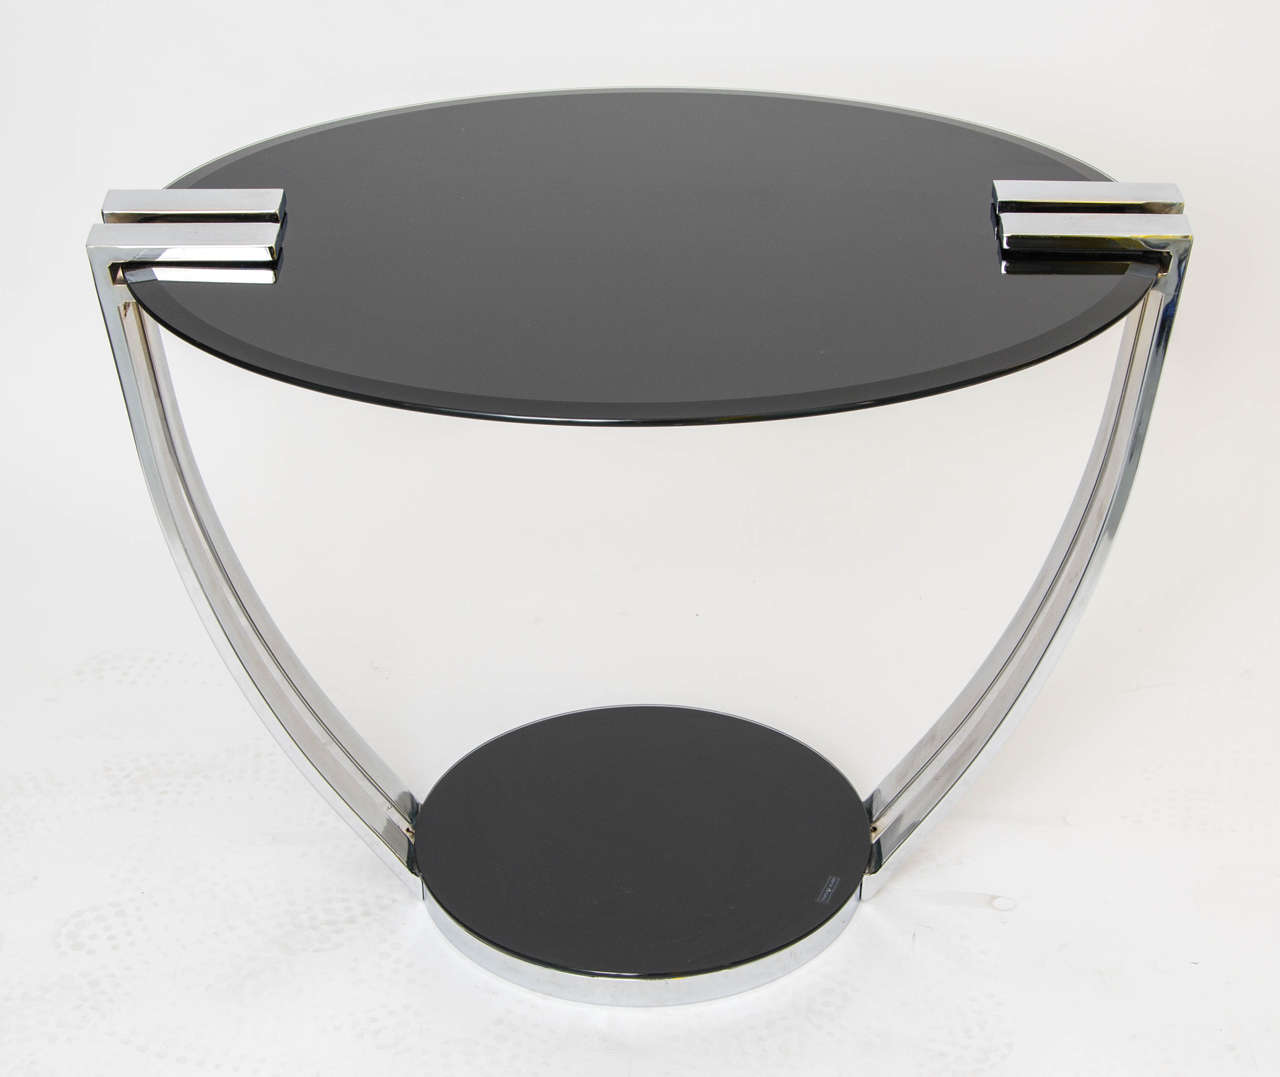 Coffee table deco style,designed by Josef Hoffmann, with black glass base and top and chrome structure, oval top and round base, prod. Germany, circa 1930.
Free shipping to London.